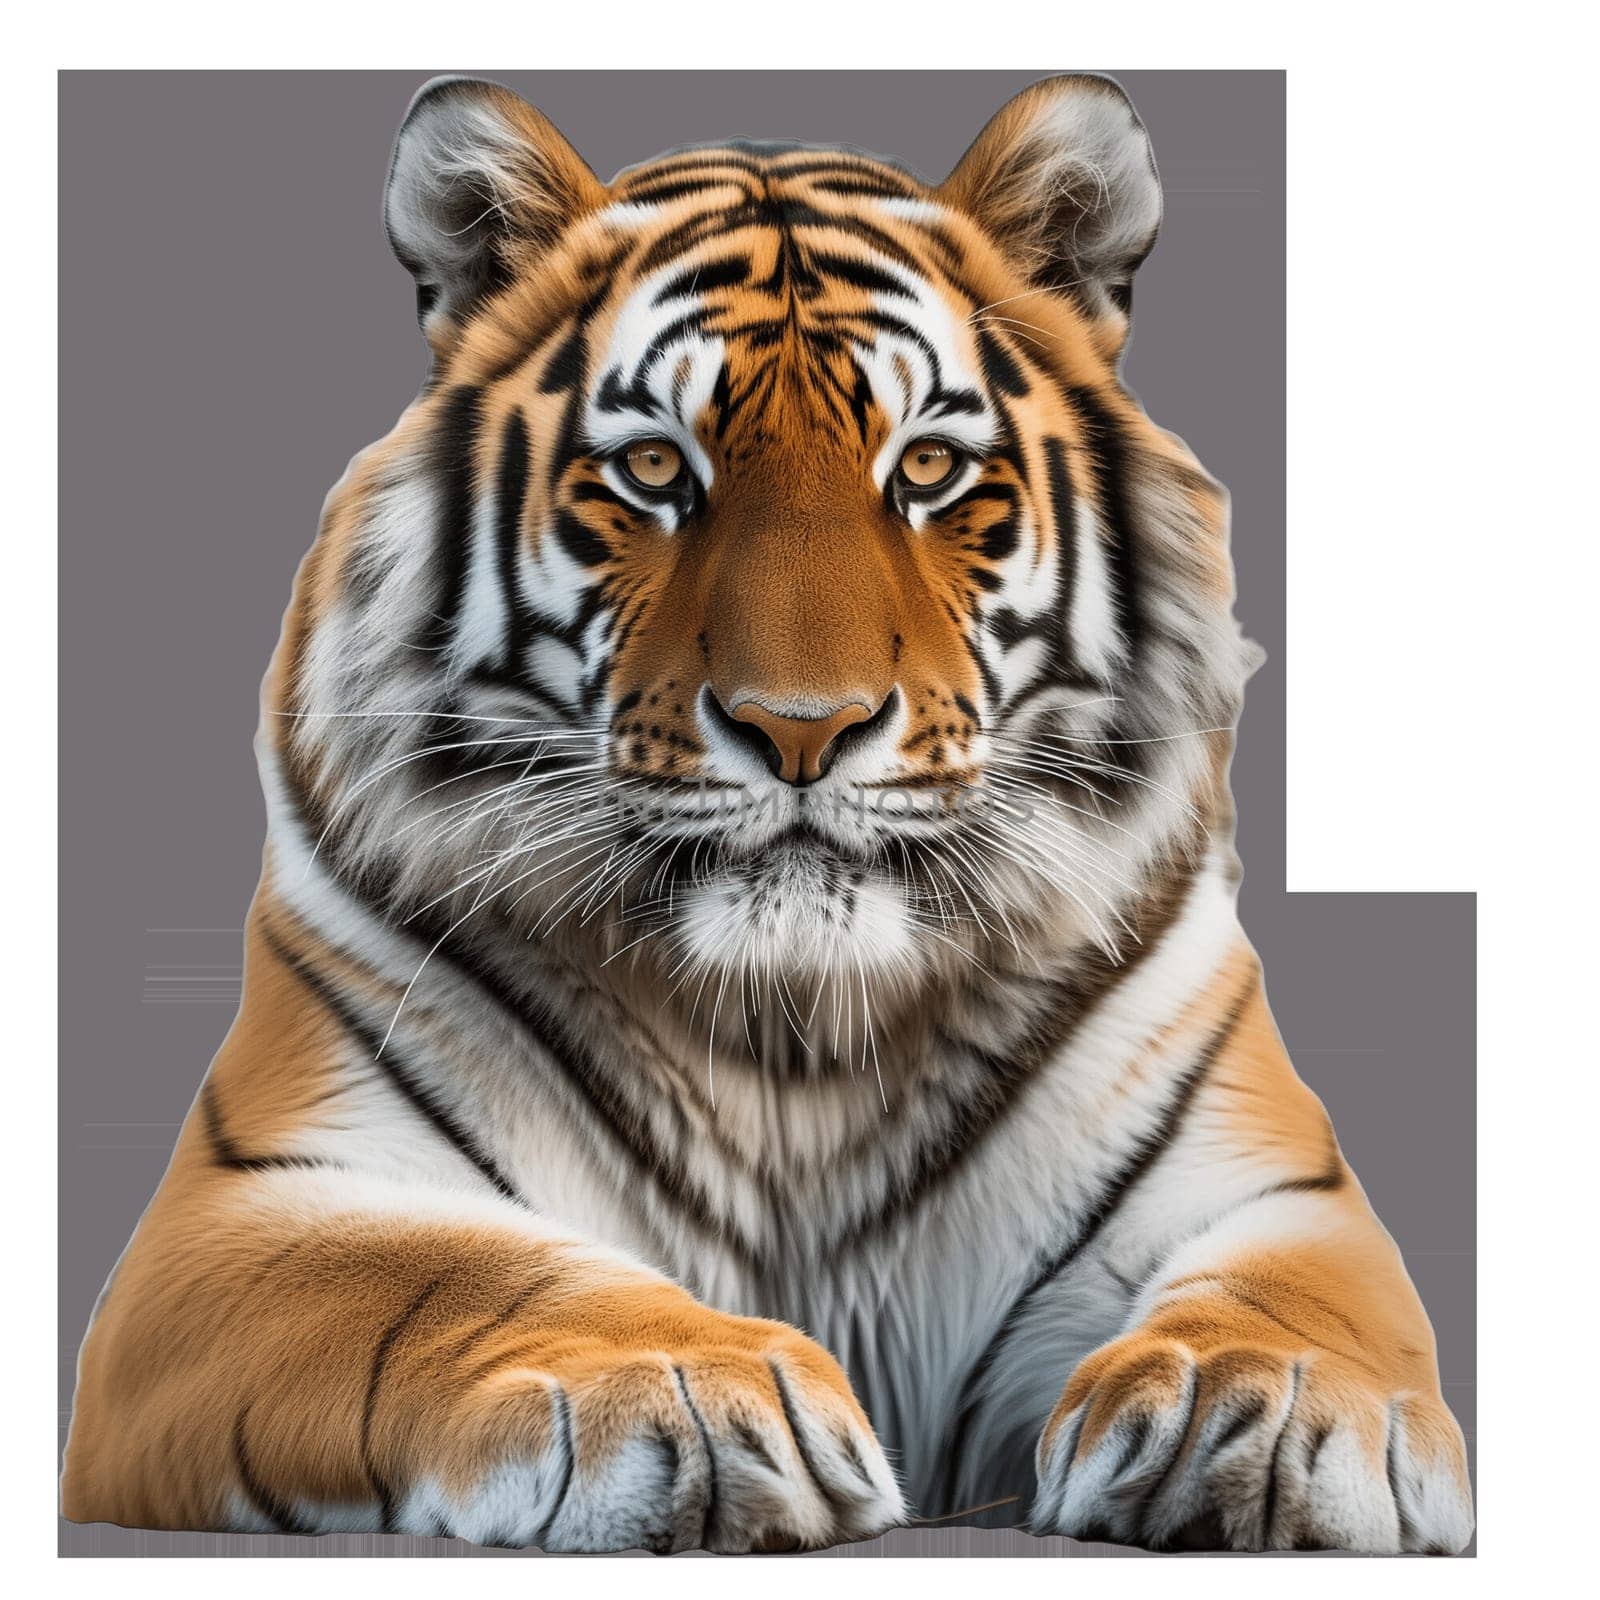 Amur wild tiger isolated image without background